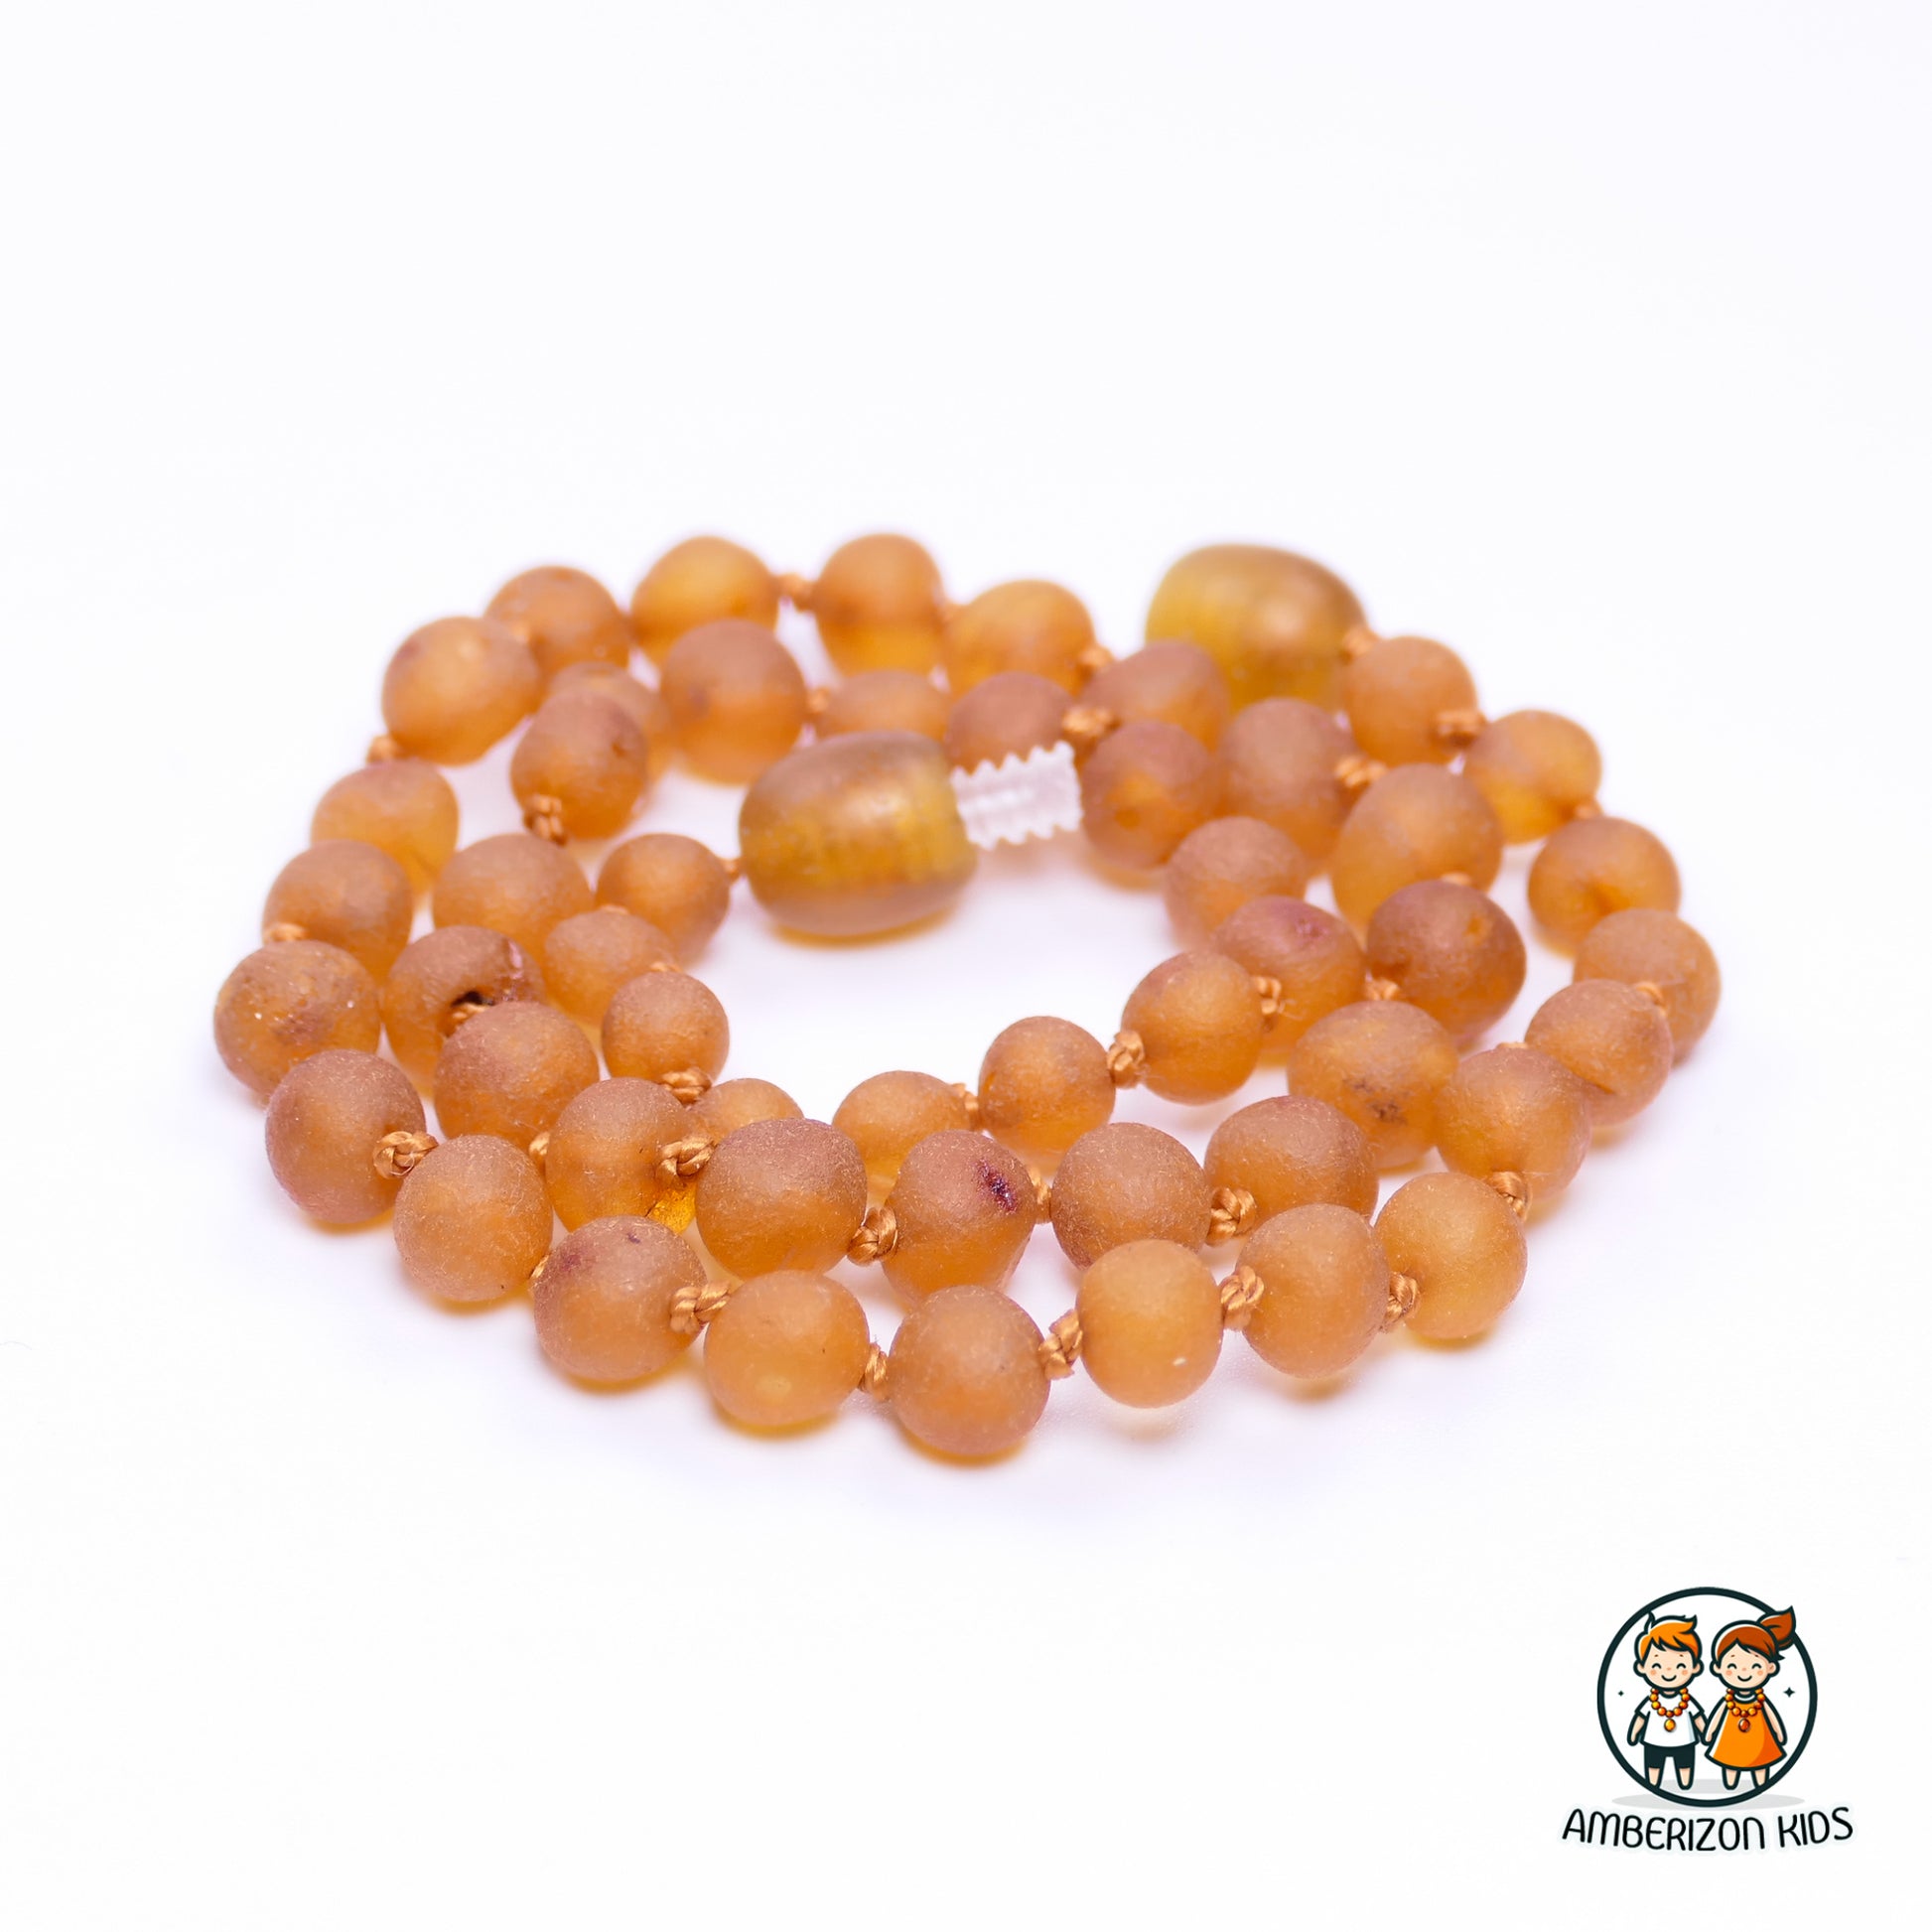 Radiant Ember Amber Teething Necklace - Unisex Design - Premium Raw Amber with Frosted Texture